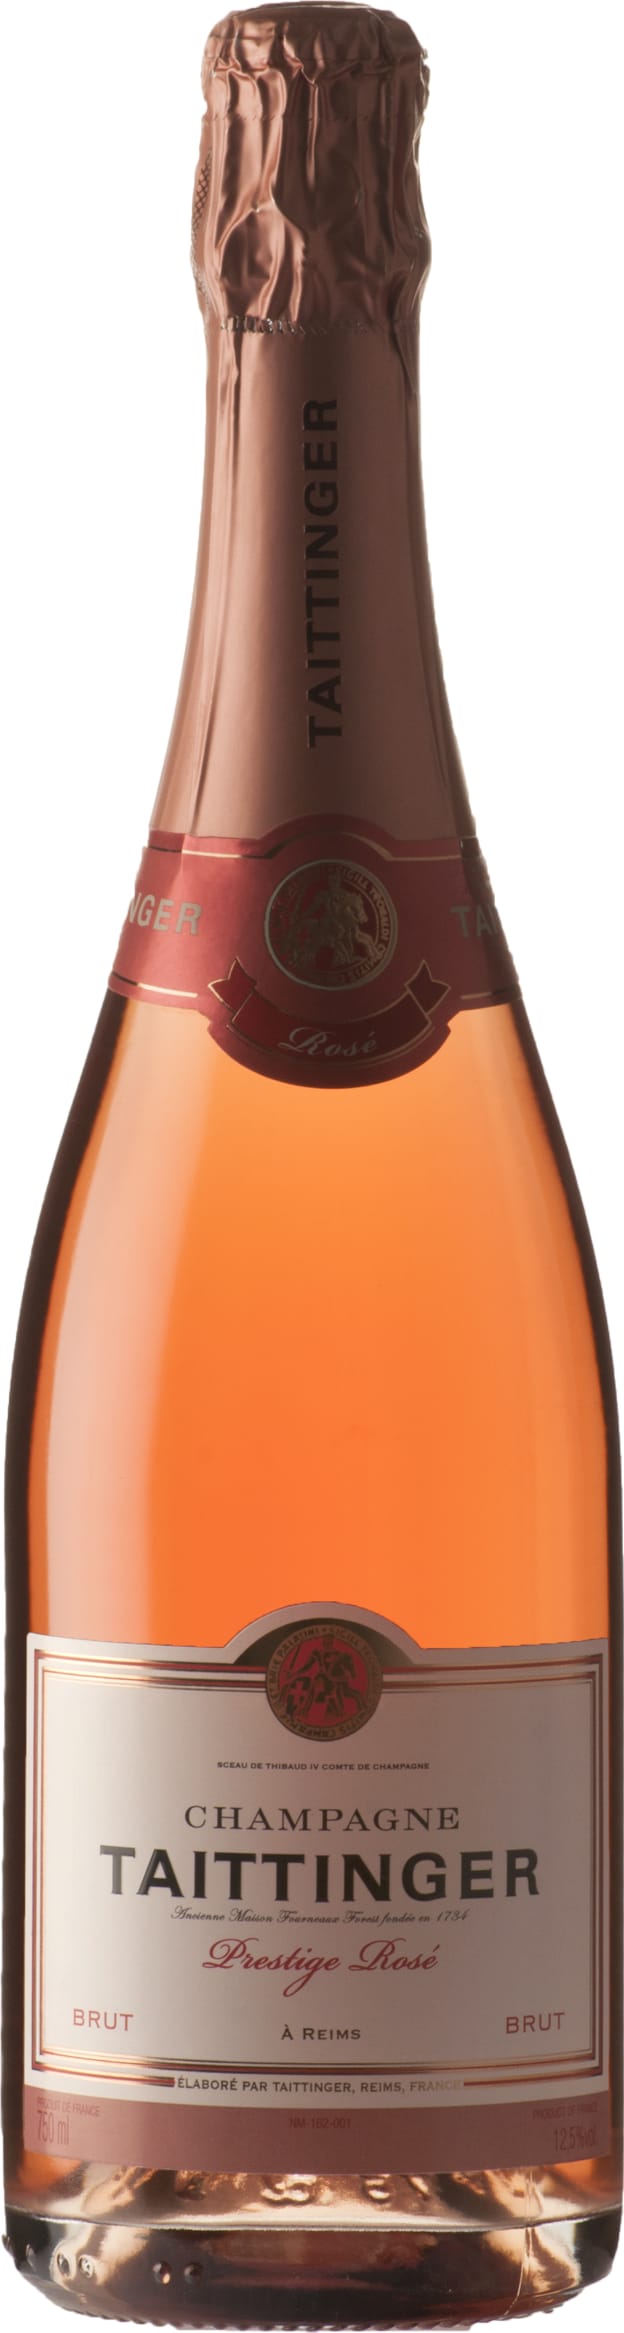 Taittinger Champagne Prestige Rose Magnum 150cl NV - Buy Taittinger Wines from GREAT WINES DIRECT wine shop